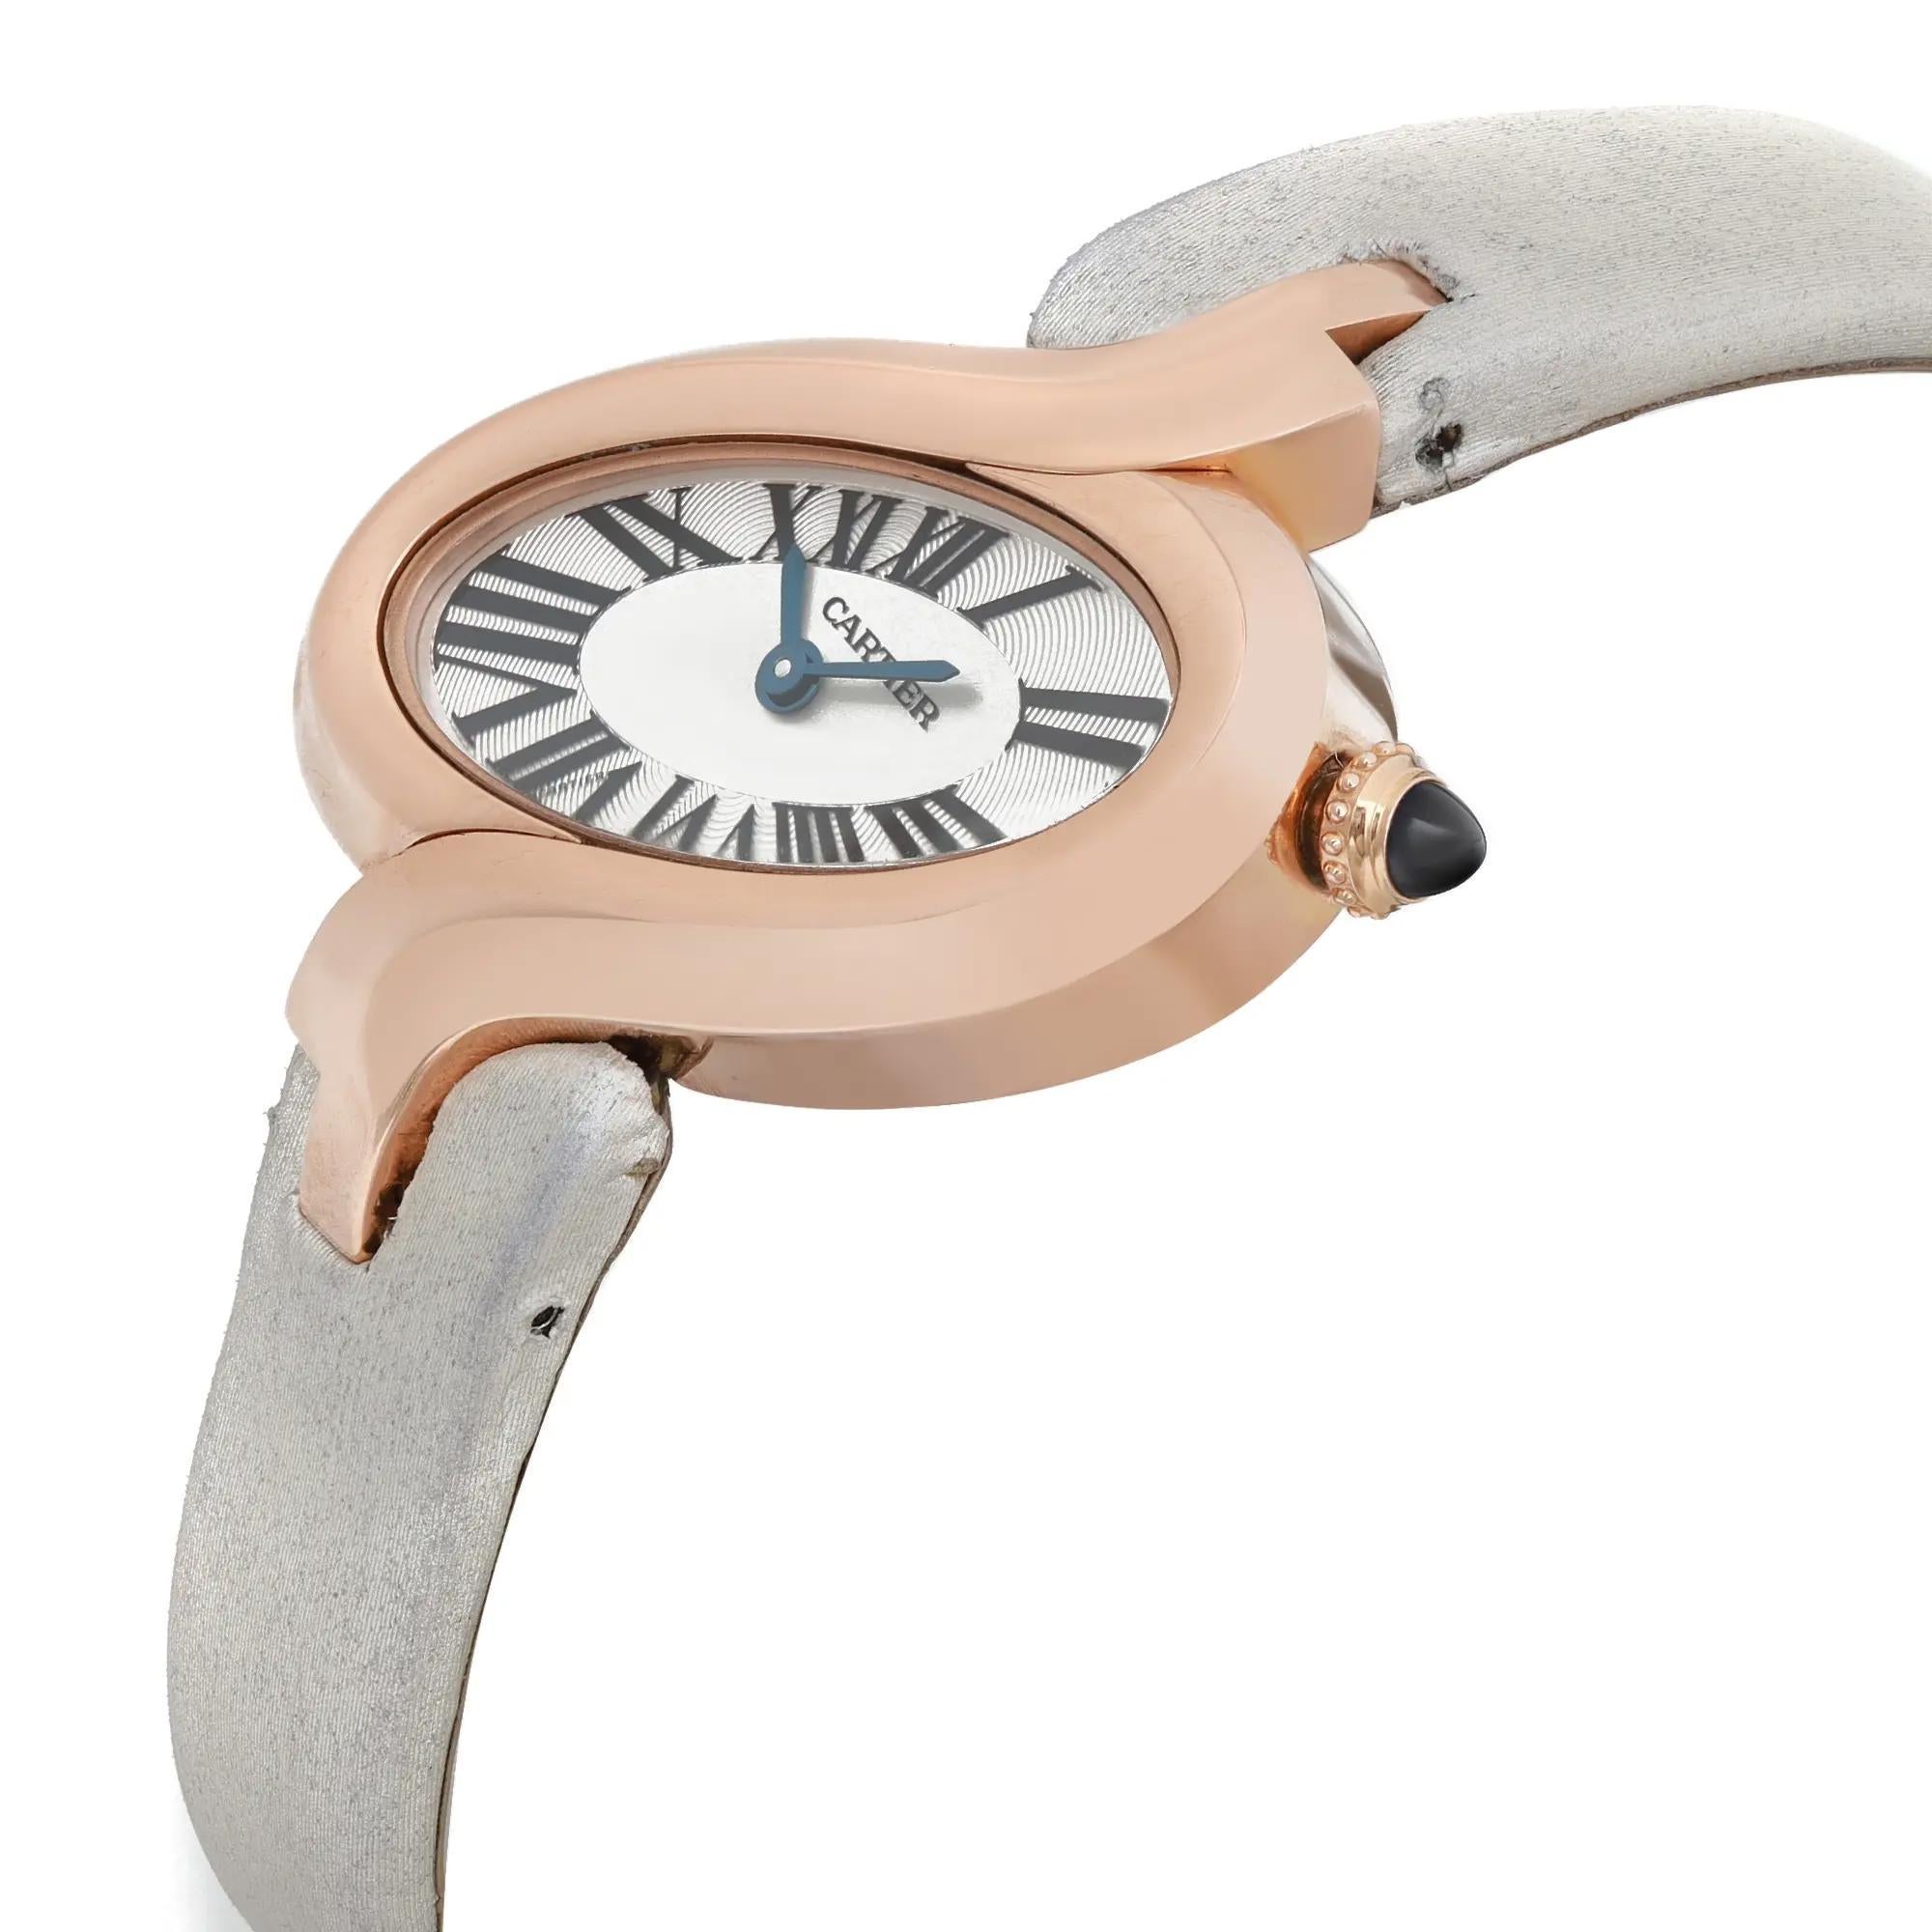 Cartier Delices De Small 18K Rose Gold Silver Dial Ladies Watch W8100009 In Good Condition For Sale In New York, NY